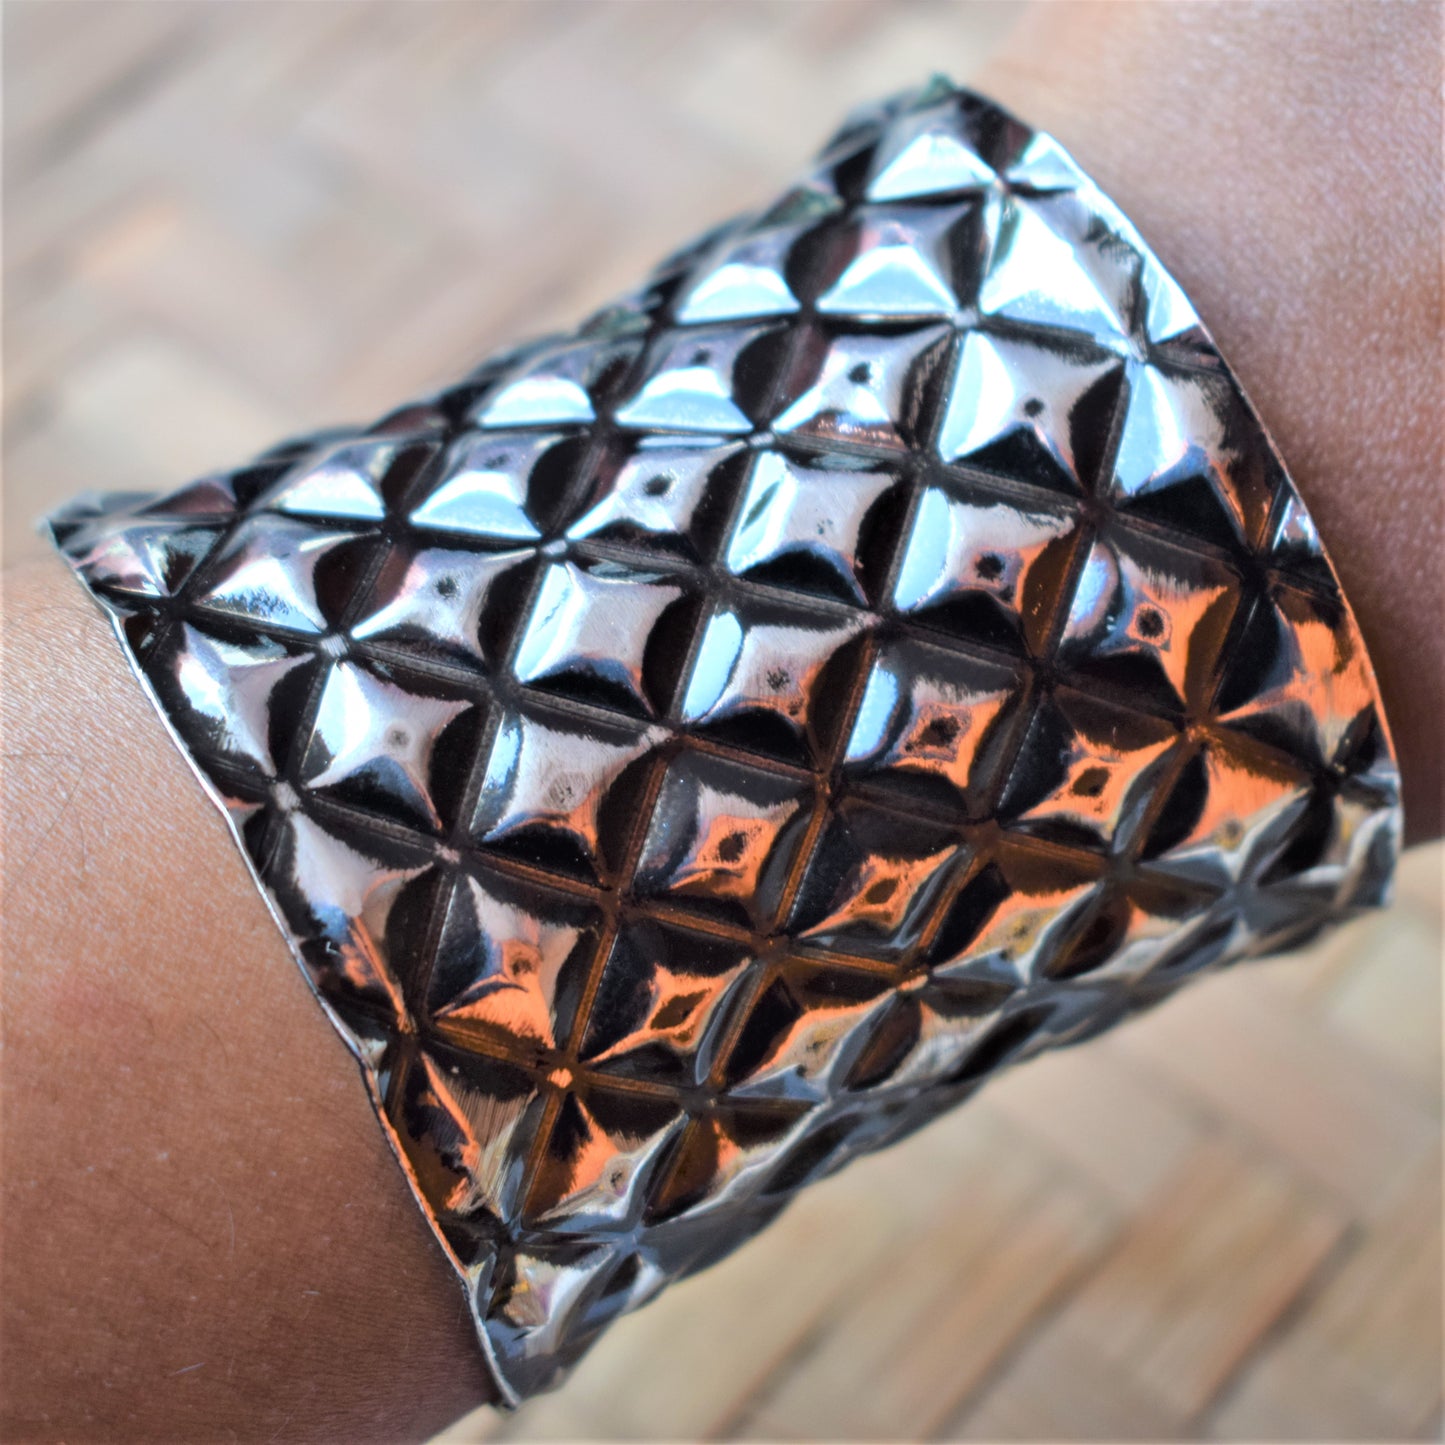 Copper and Silver Oxidised Patterned Embossed Tribal Cuff Bracelet - GlitterGleam